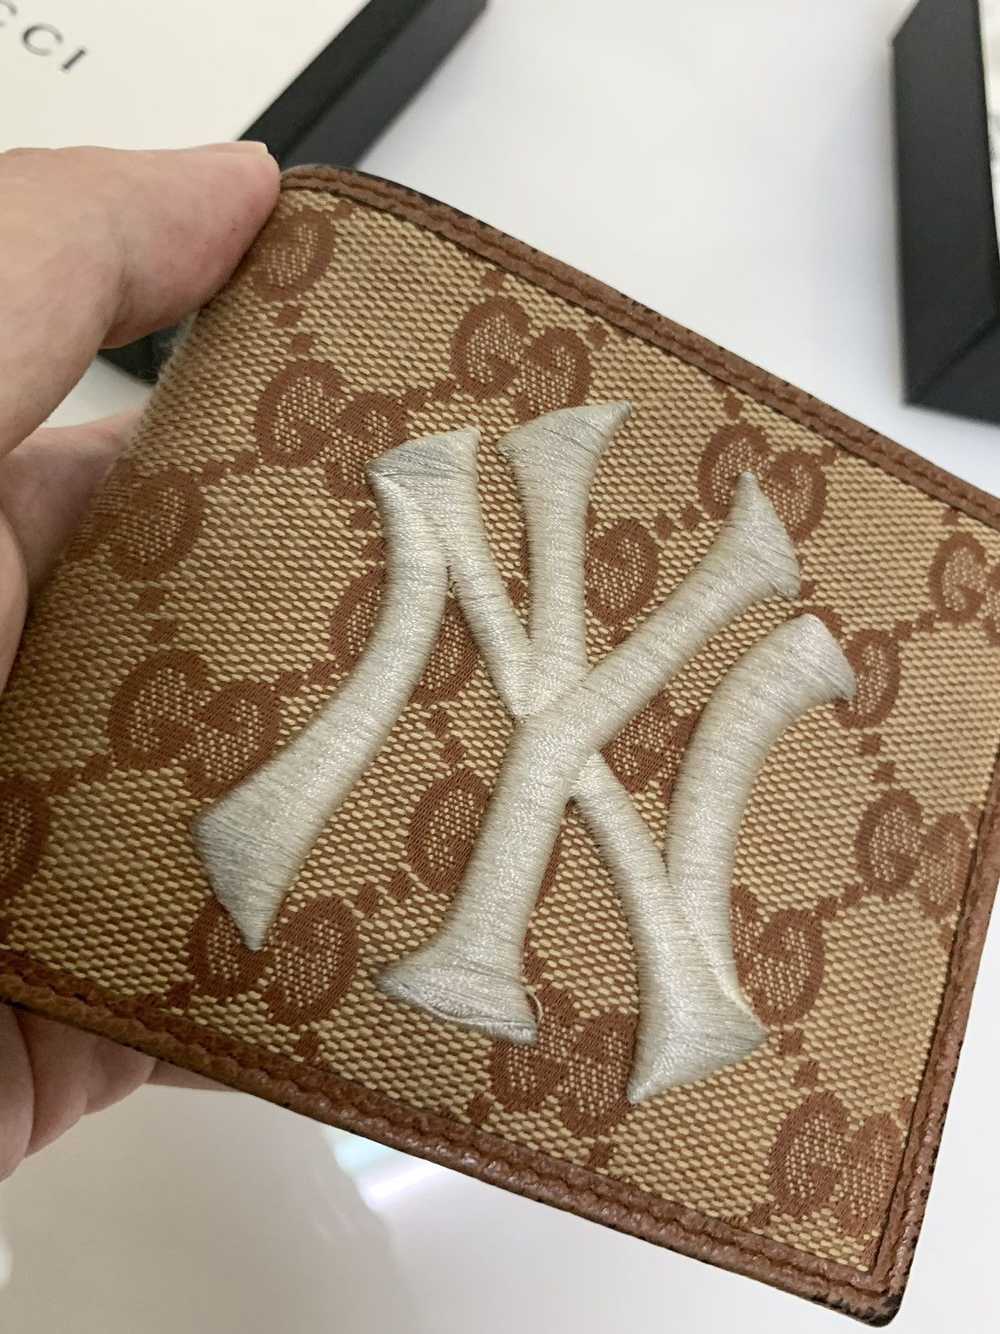 Gucci Gucci New York Yankees Patch Wallet - image 9